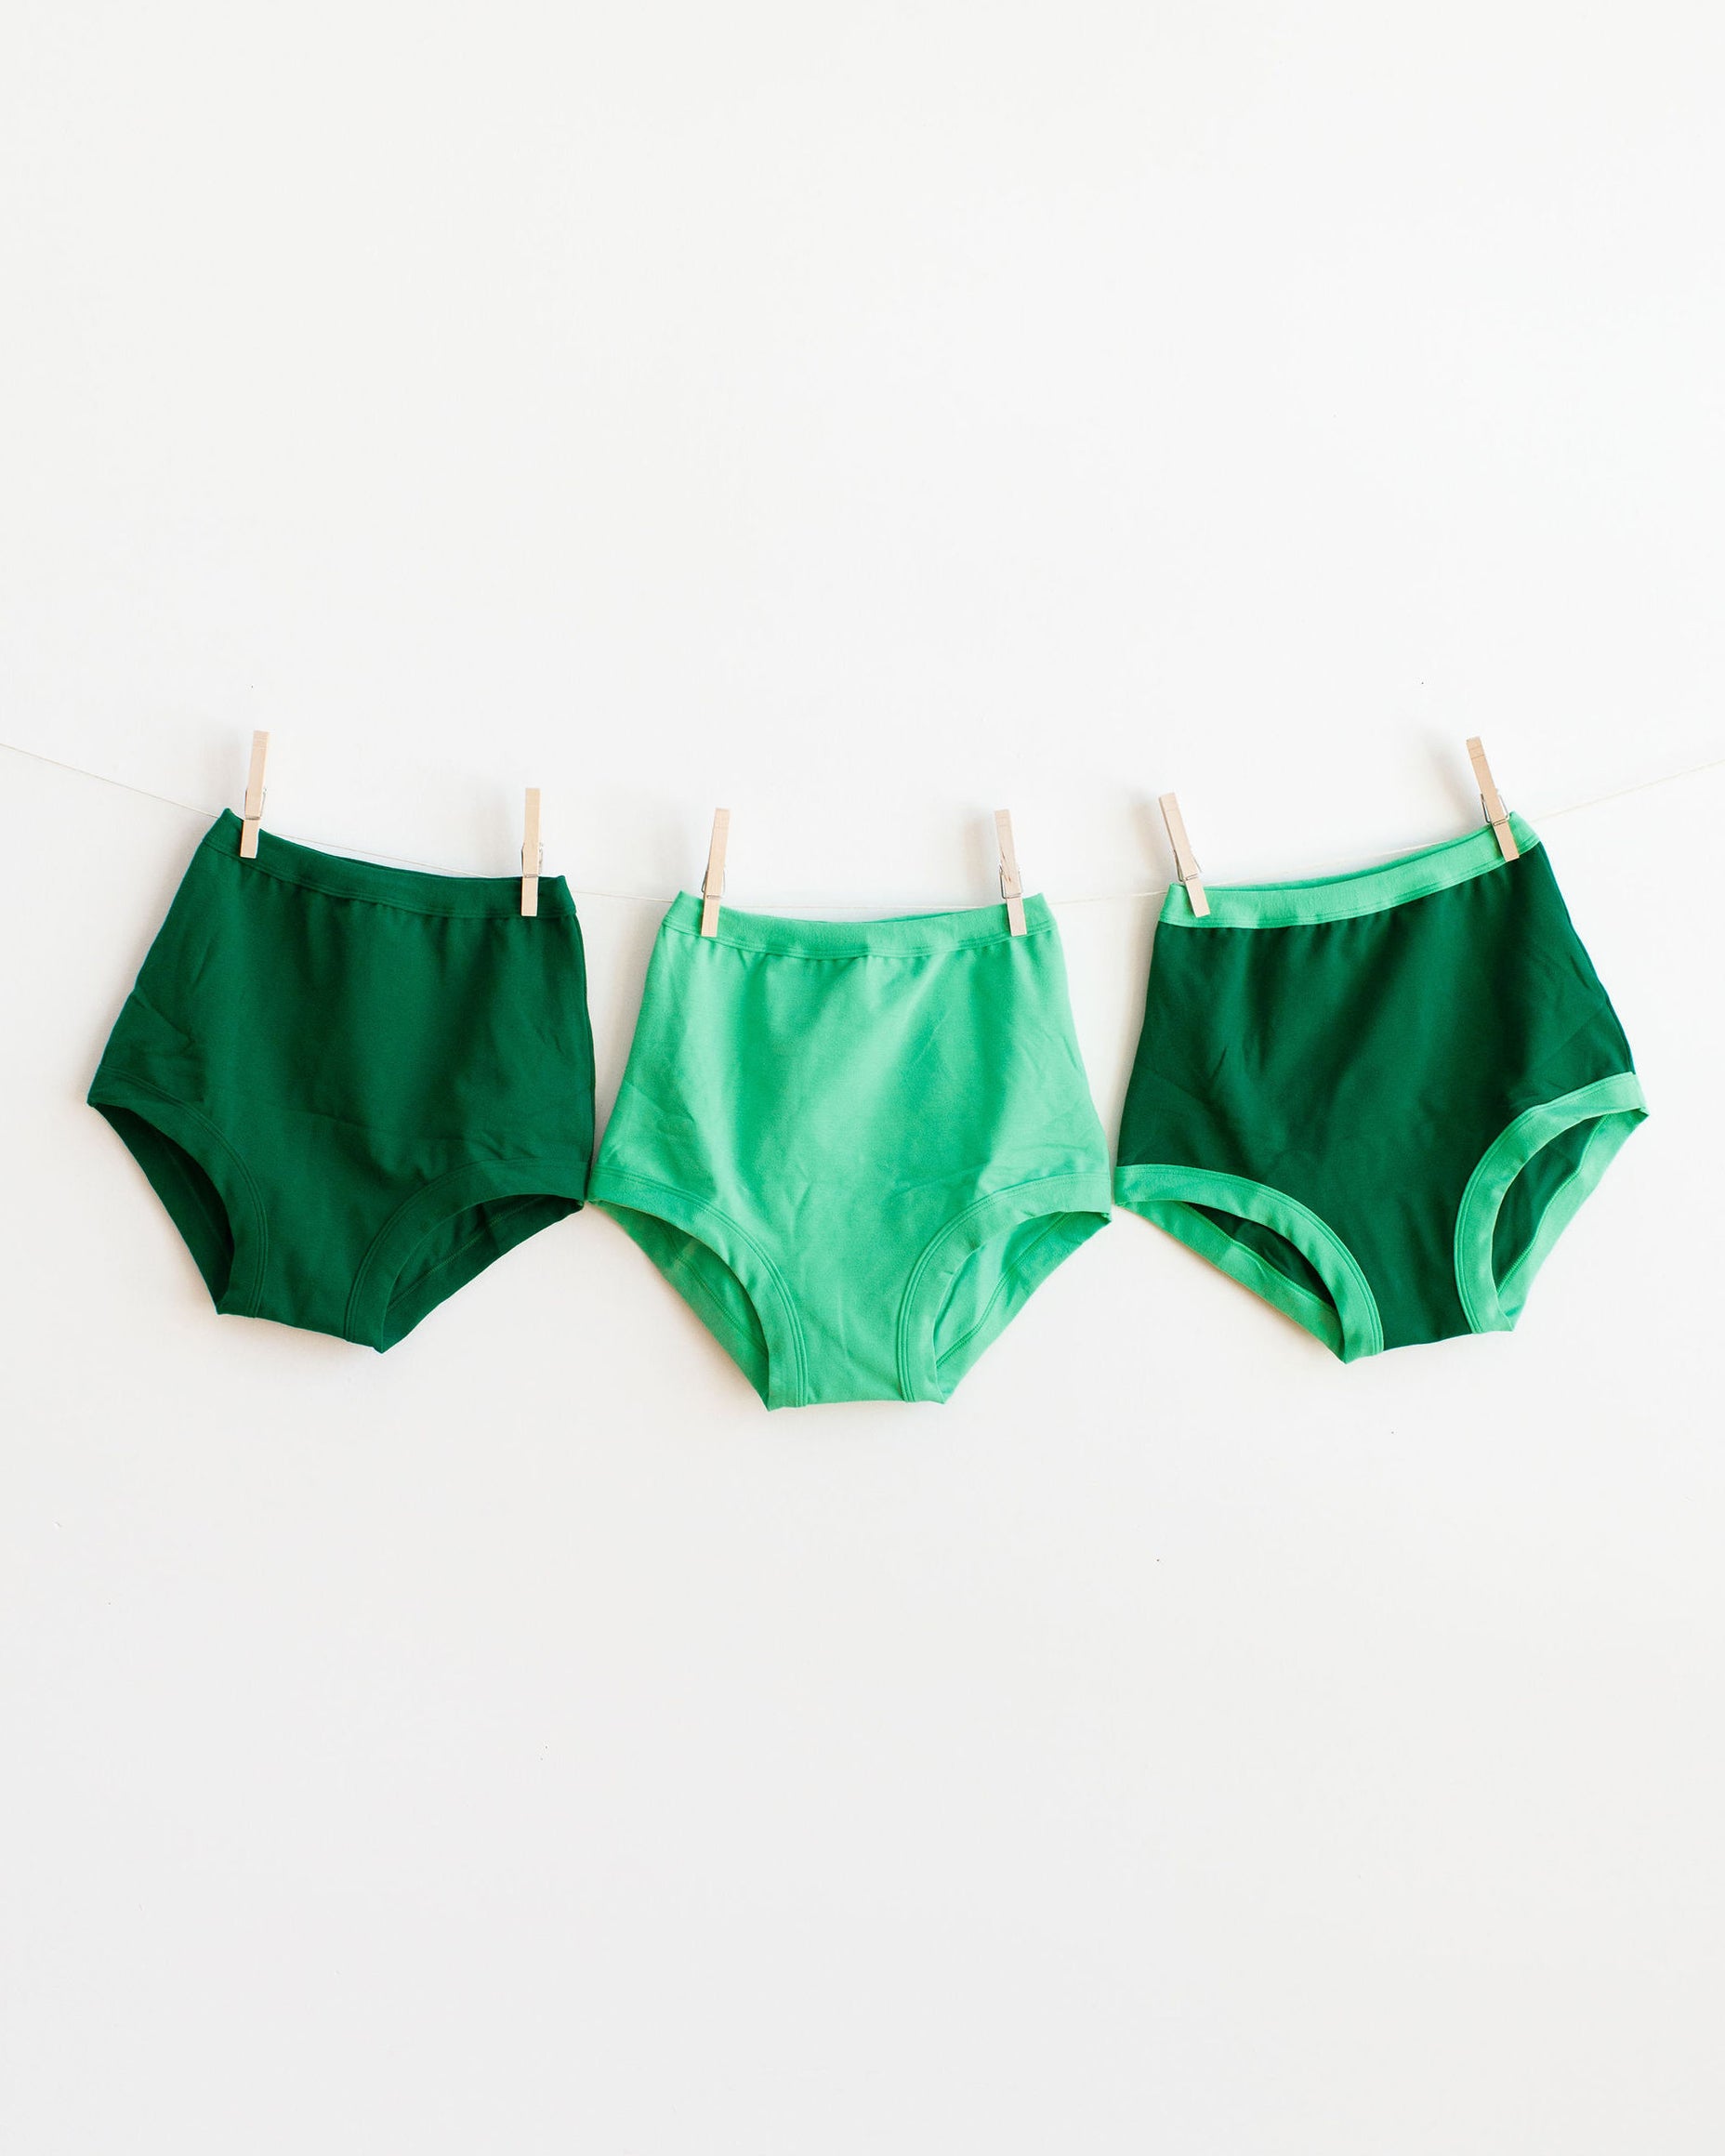 Three different green colored Sky Rise style underwear hanging on a white background.